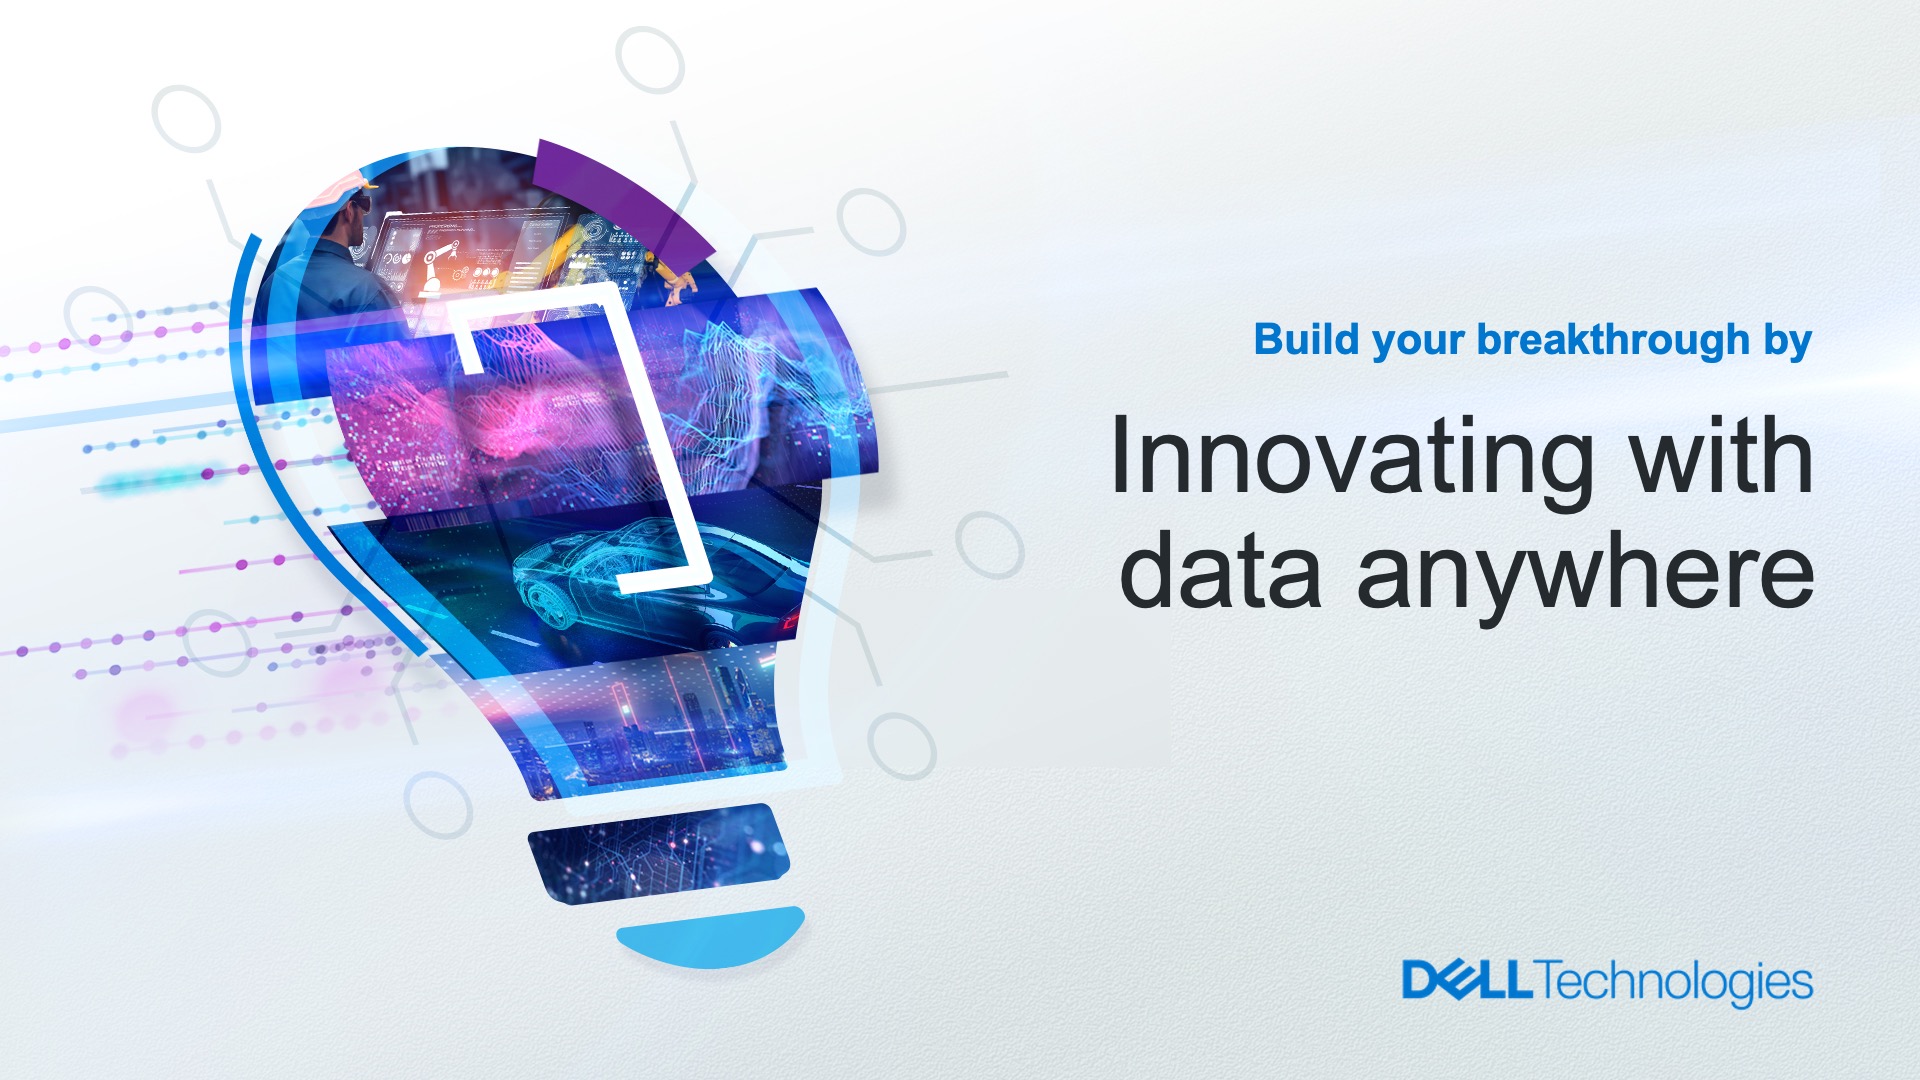 A slide cover design for the Dell Data Anywhere presentation. It shows layers of images aligning to form a lightbulb.